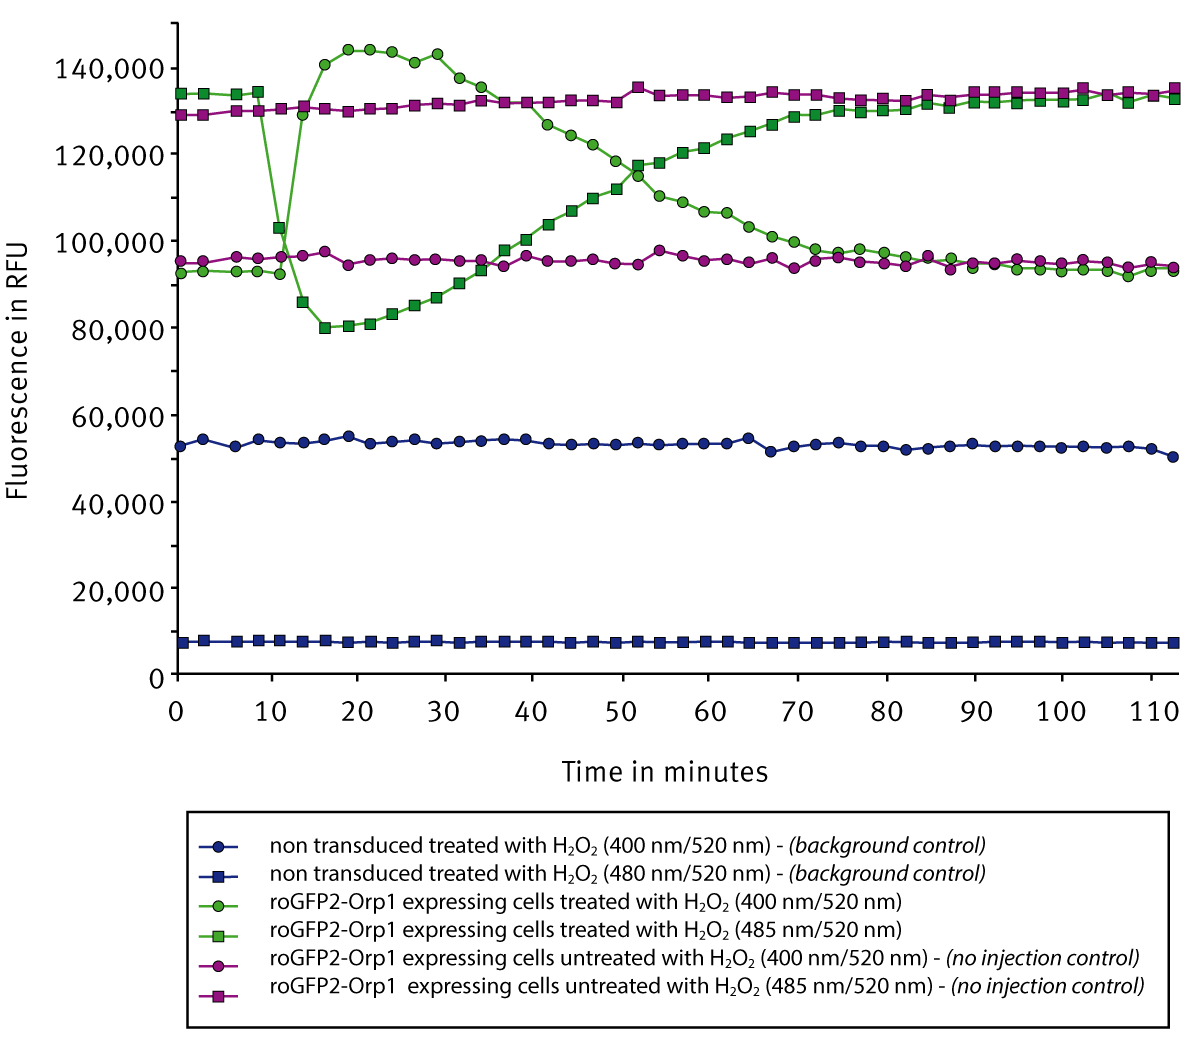 Fig. 2: Signal curves for roGFP2-Orp1 transduced cells before and after injection of hydrogen peroxide in comparison to a non-transfection control and a no injection control.